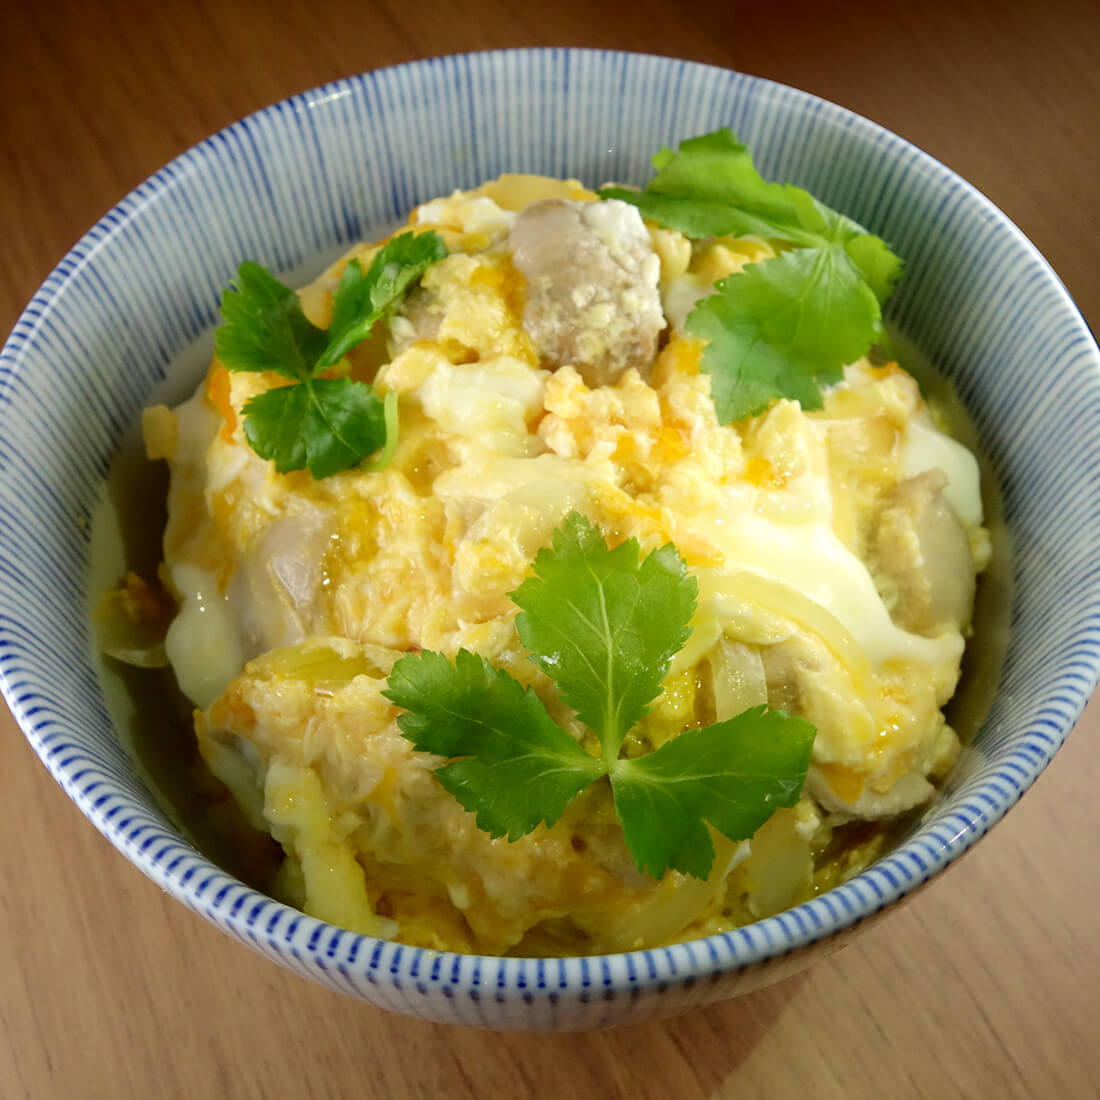 Oyako don<br />(Chicken and egg over rice)